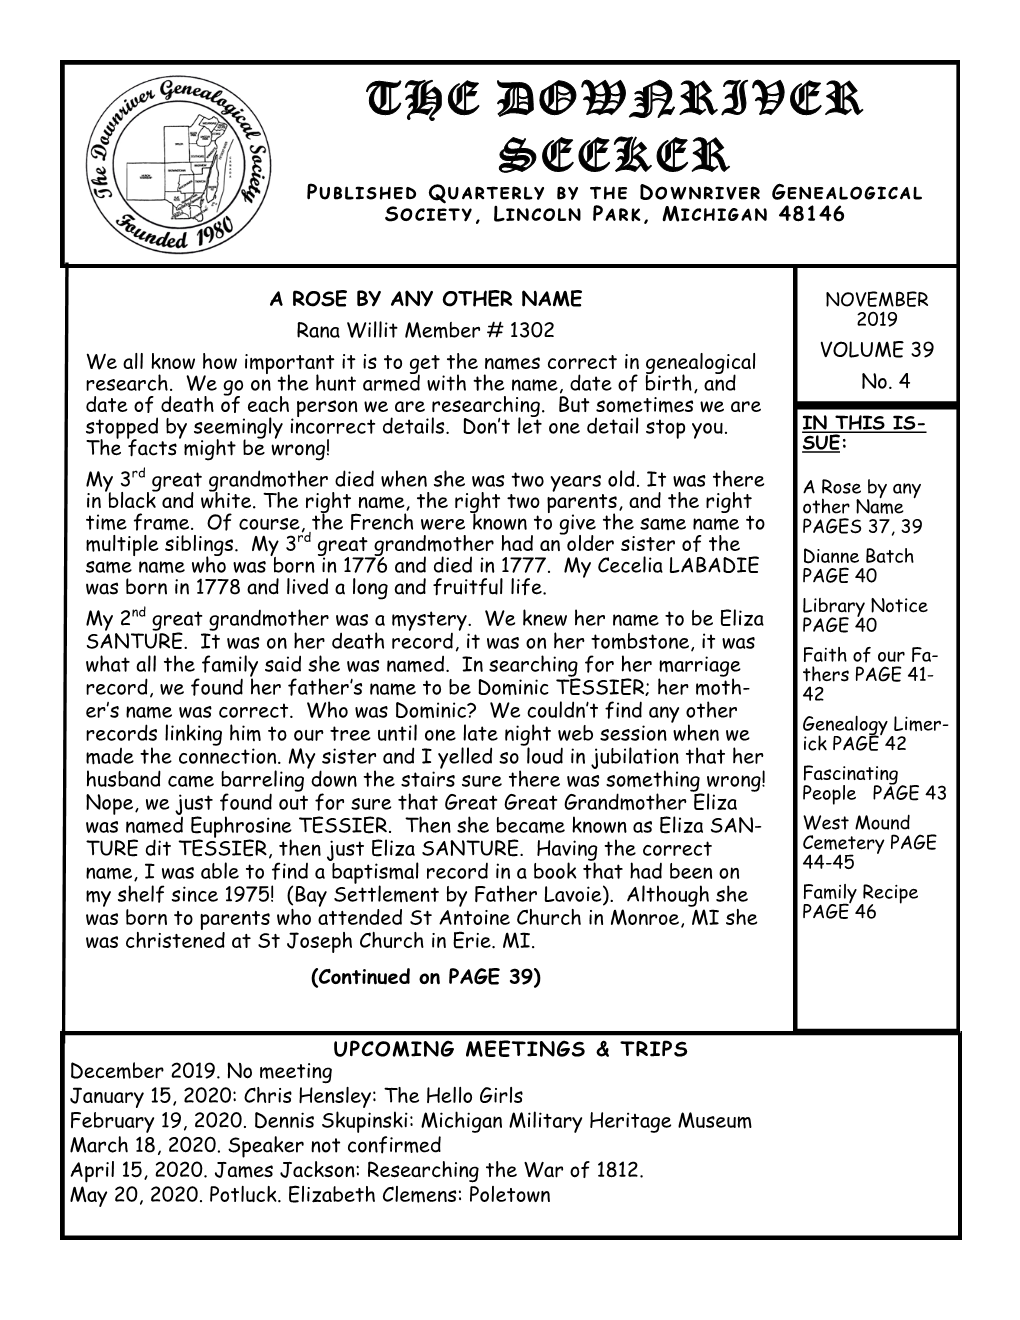 THE DOWNRIVER SEEKER Published Quarterly by the Downriver Genealogical Society, Lincoln Park, Michigan 48146